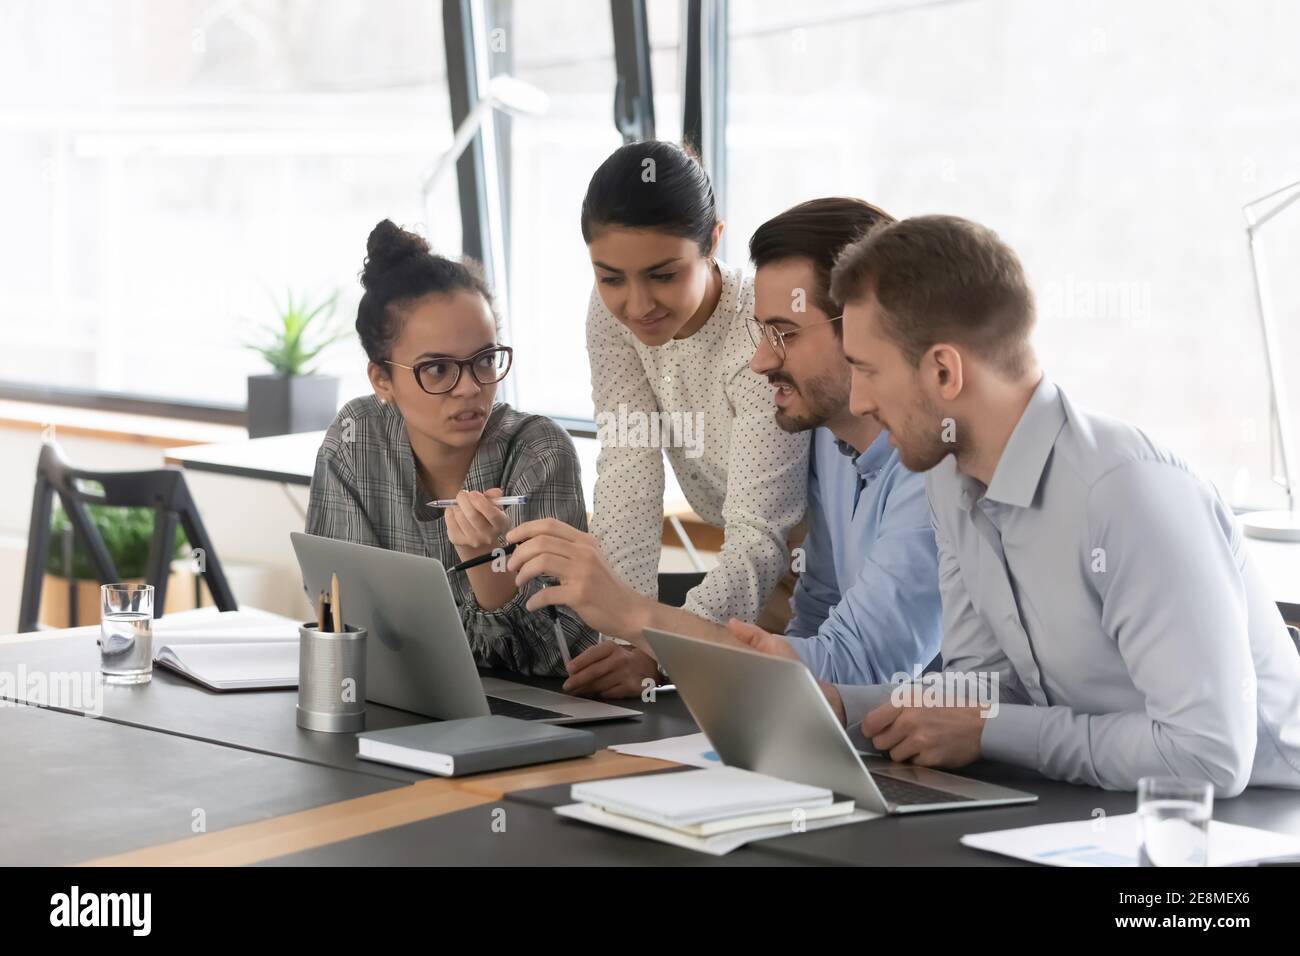 Mixed raced millennial employees talking at shared desk with laptops Stock Photo